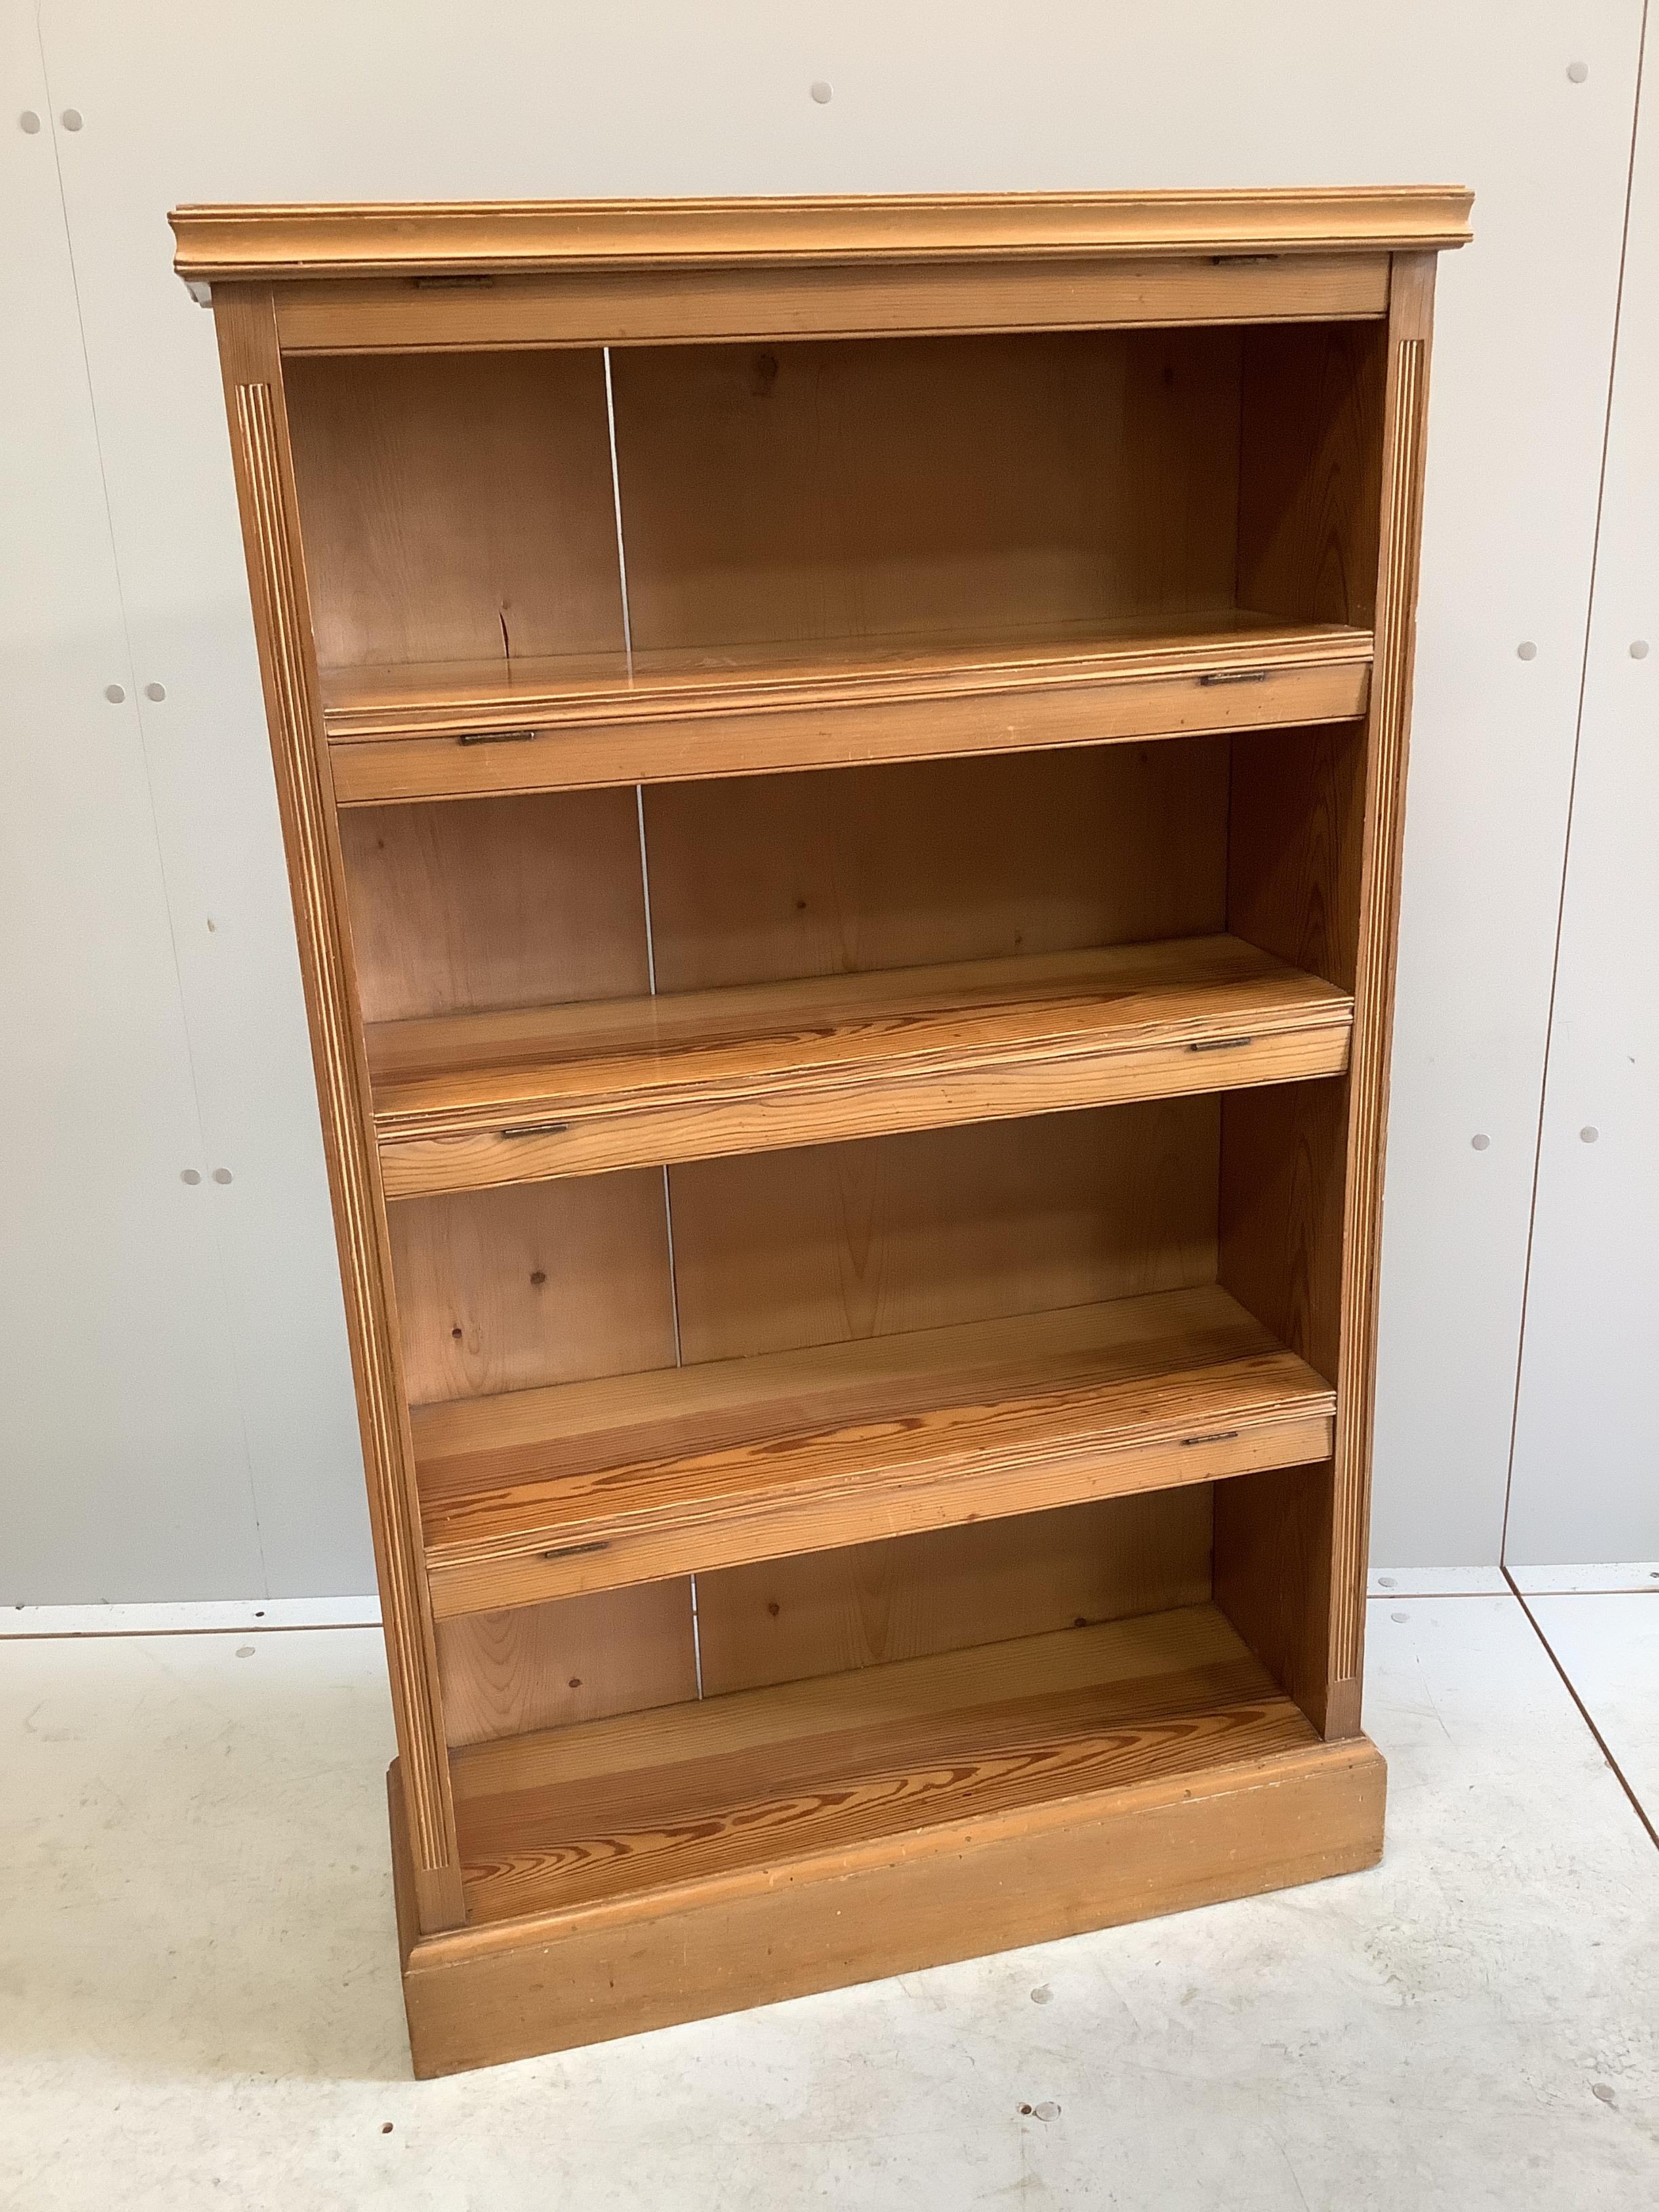 An early 20th century pitch pine open bookcase, width 75cm, depth 25cm, height 122cm